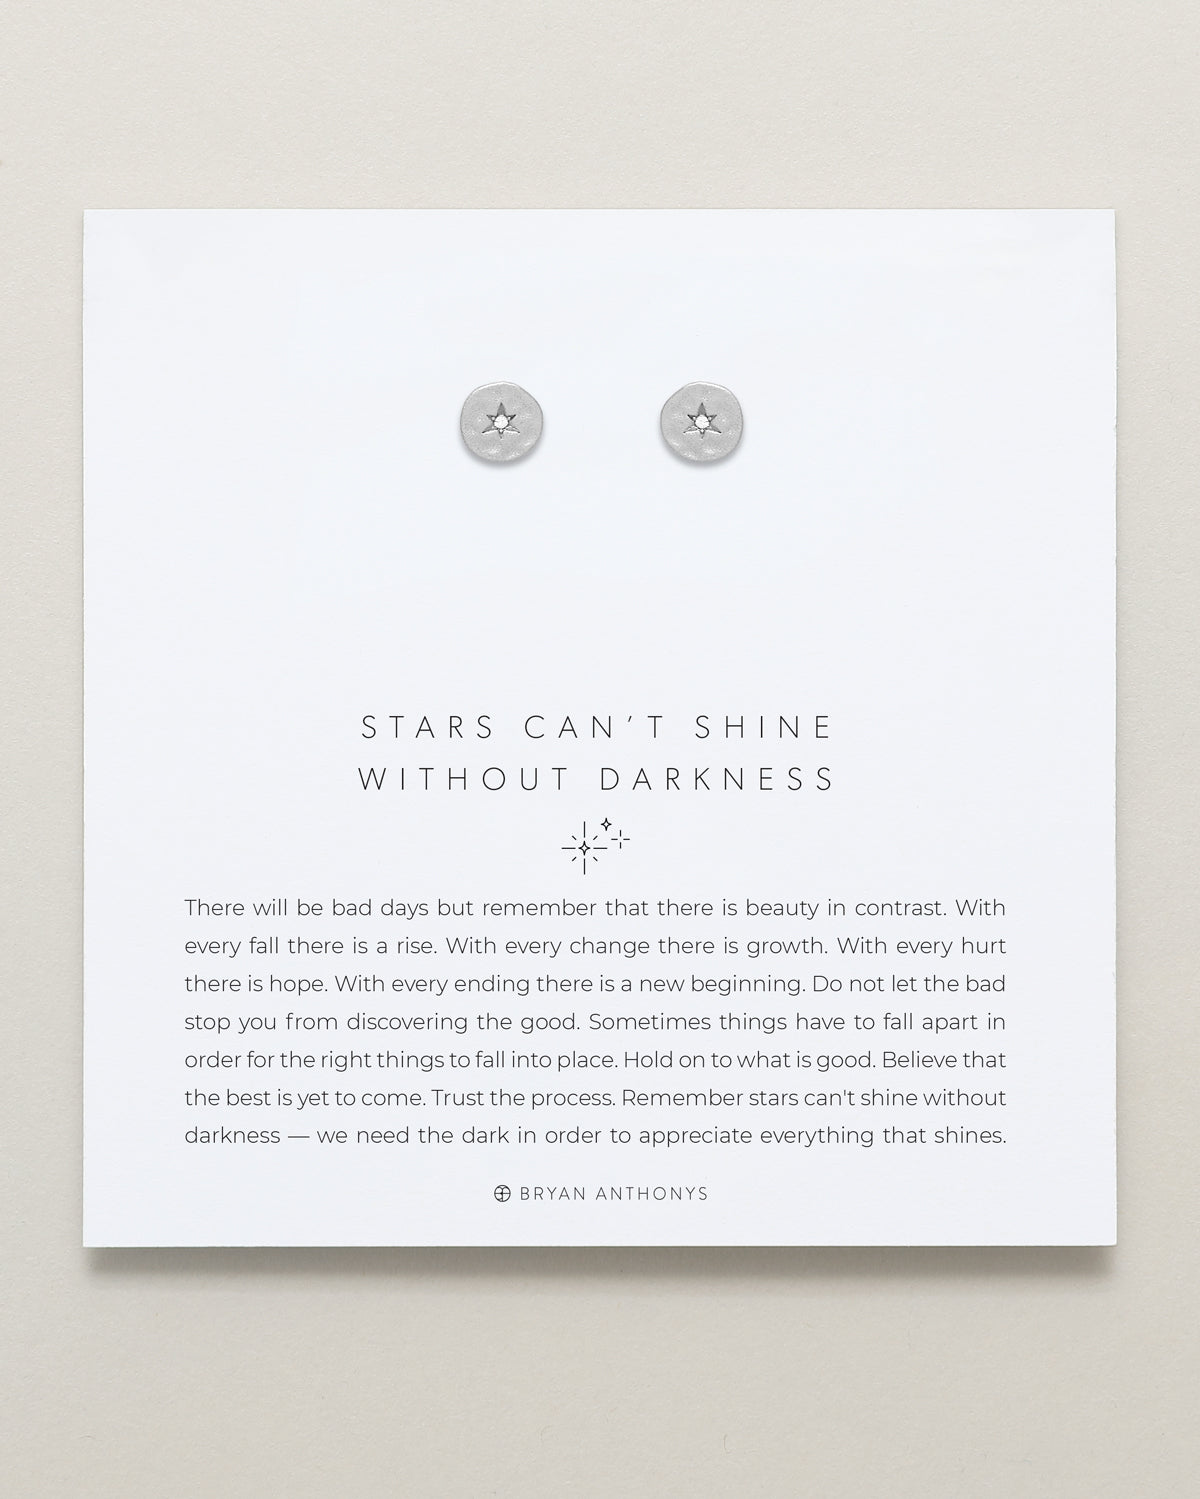 Stars Can't Shine Without Darkness Earrings in silver finish